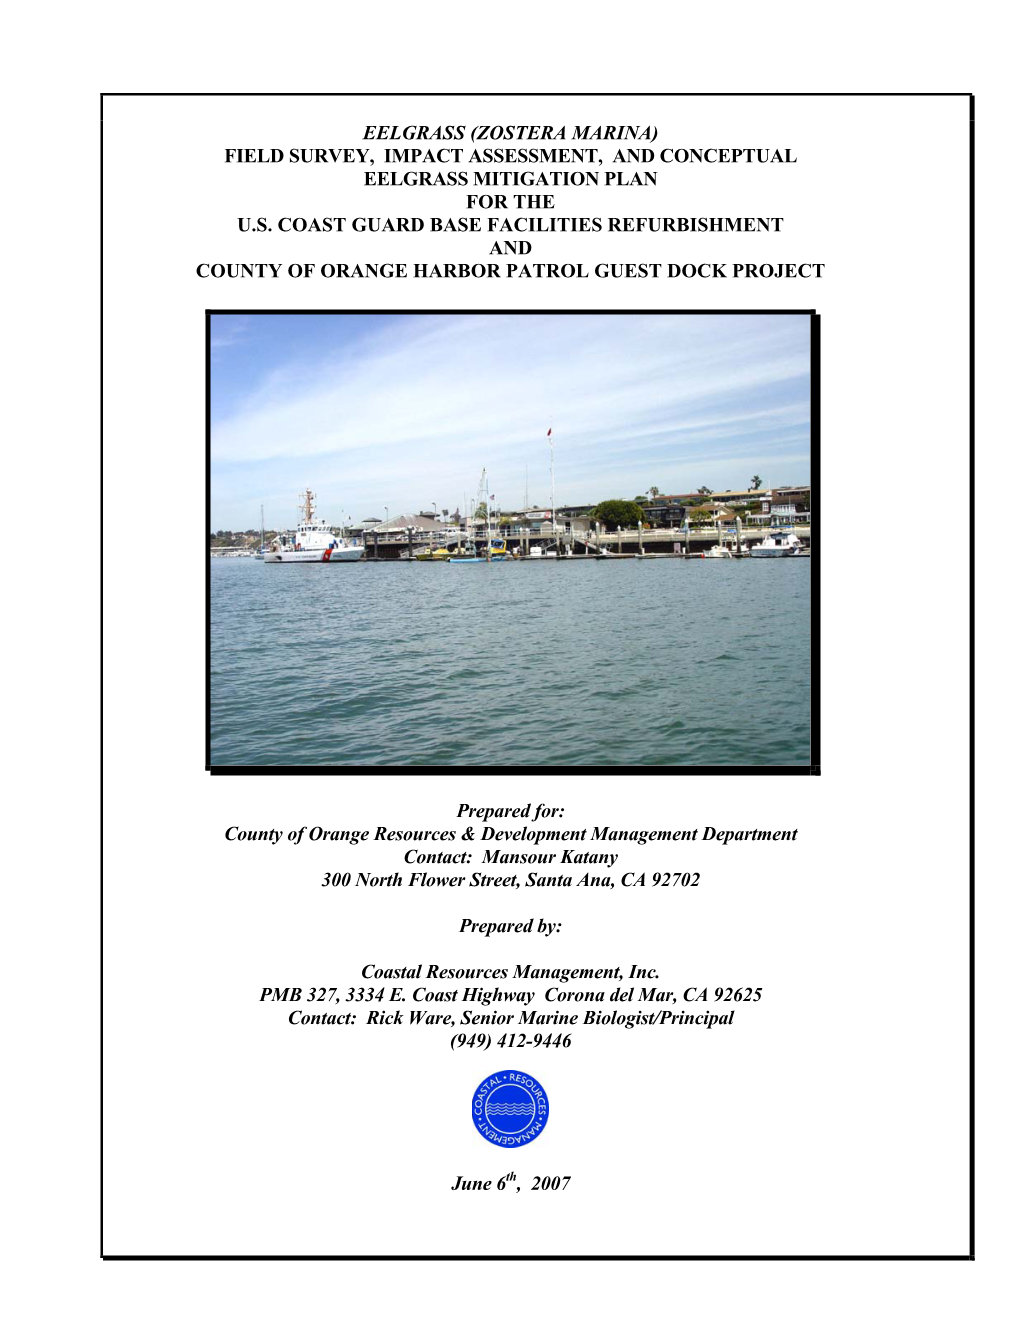 Zostera Marina) Field Survey, Impact Assessment, and Conceptual Eelgrass Mitigation Plan for the U.S